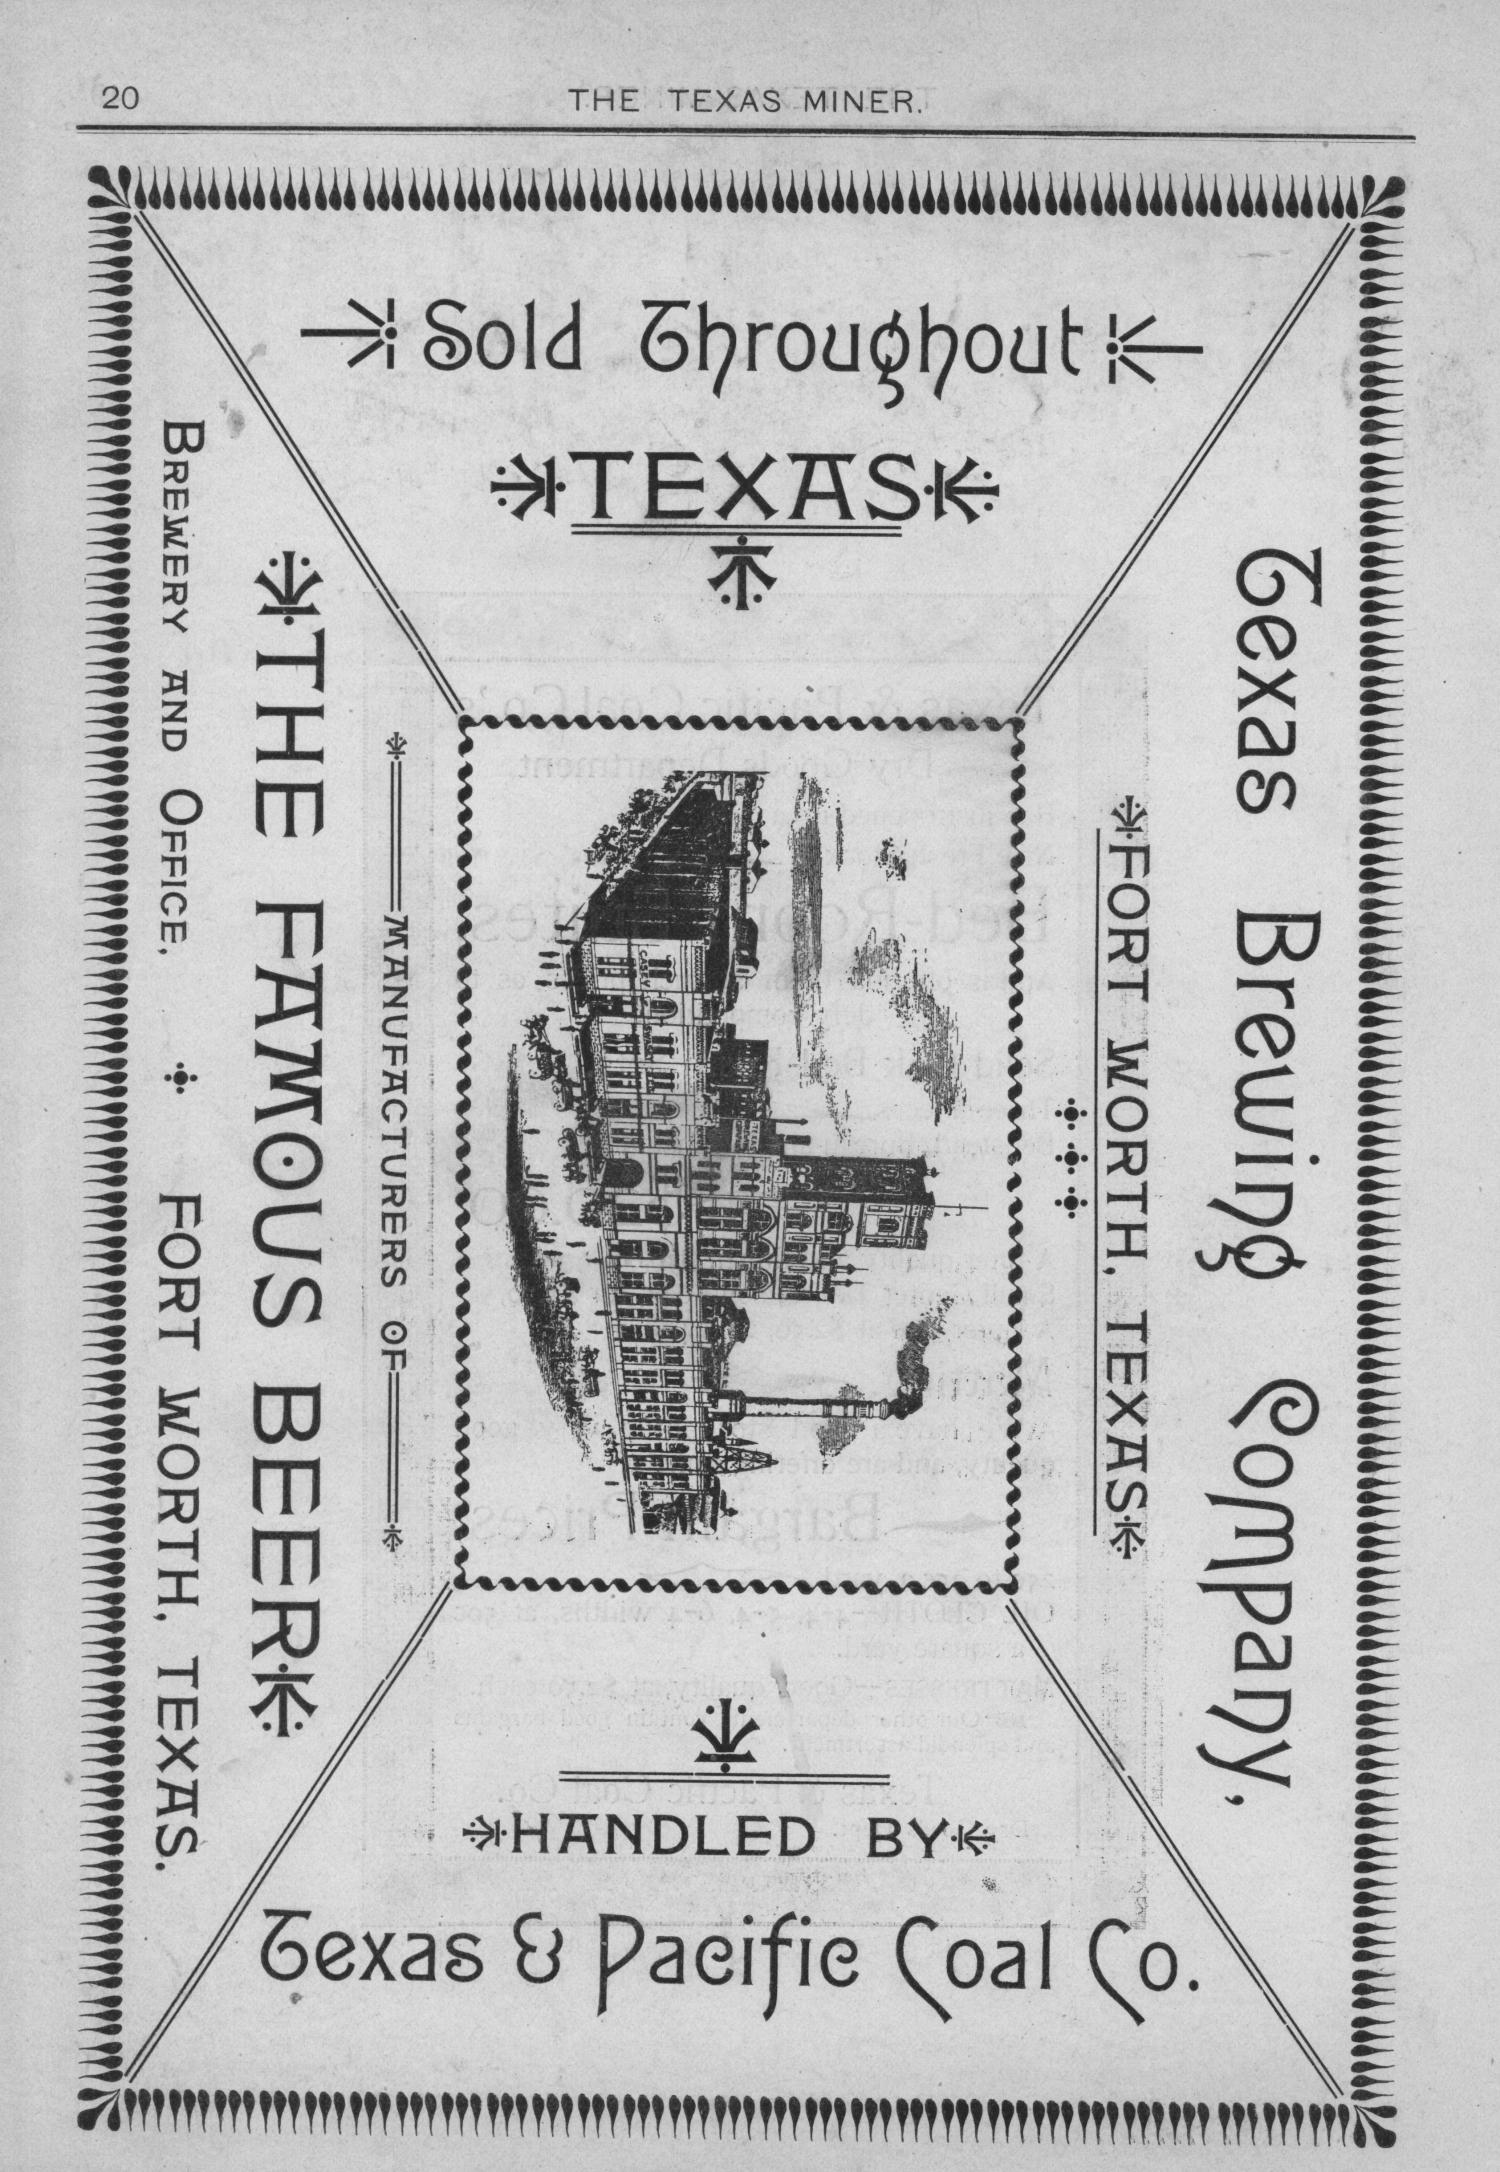 The Texas Miner, Volume 1, Number 28, July 28, 1894
                                                
                                                    20
                                                